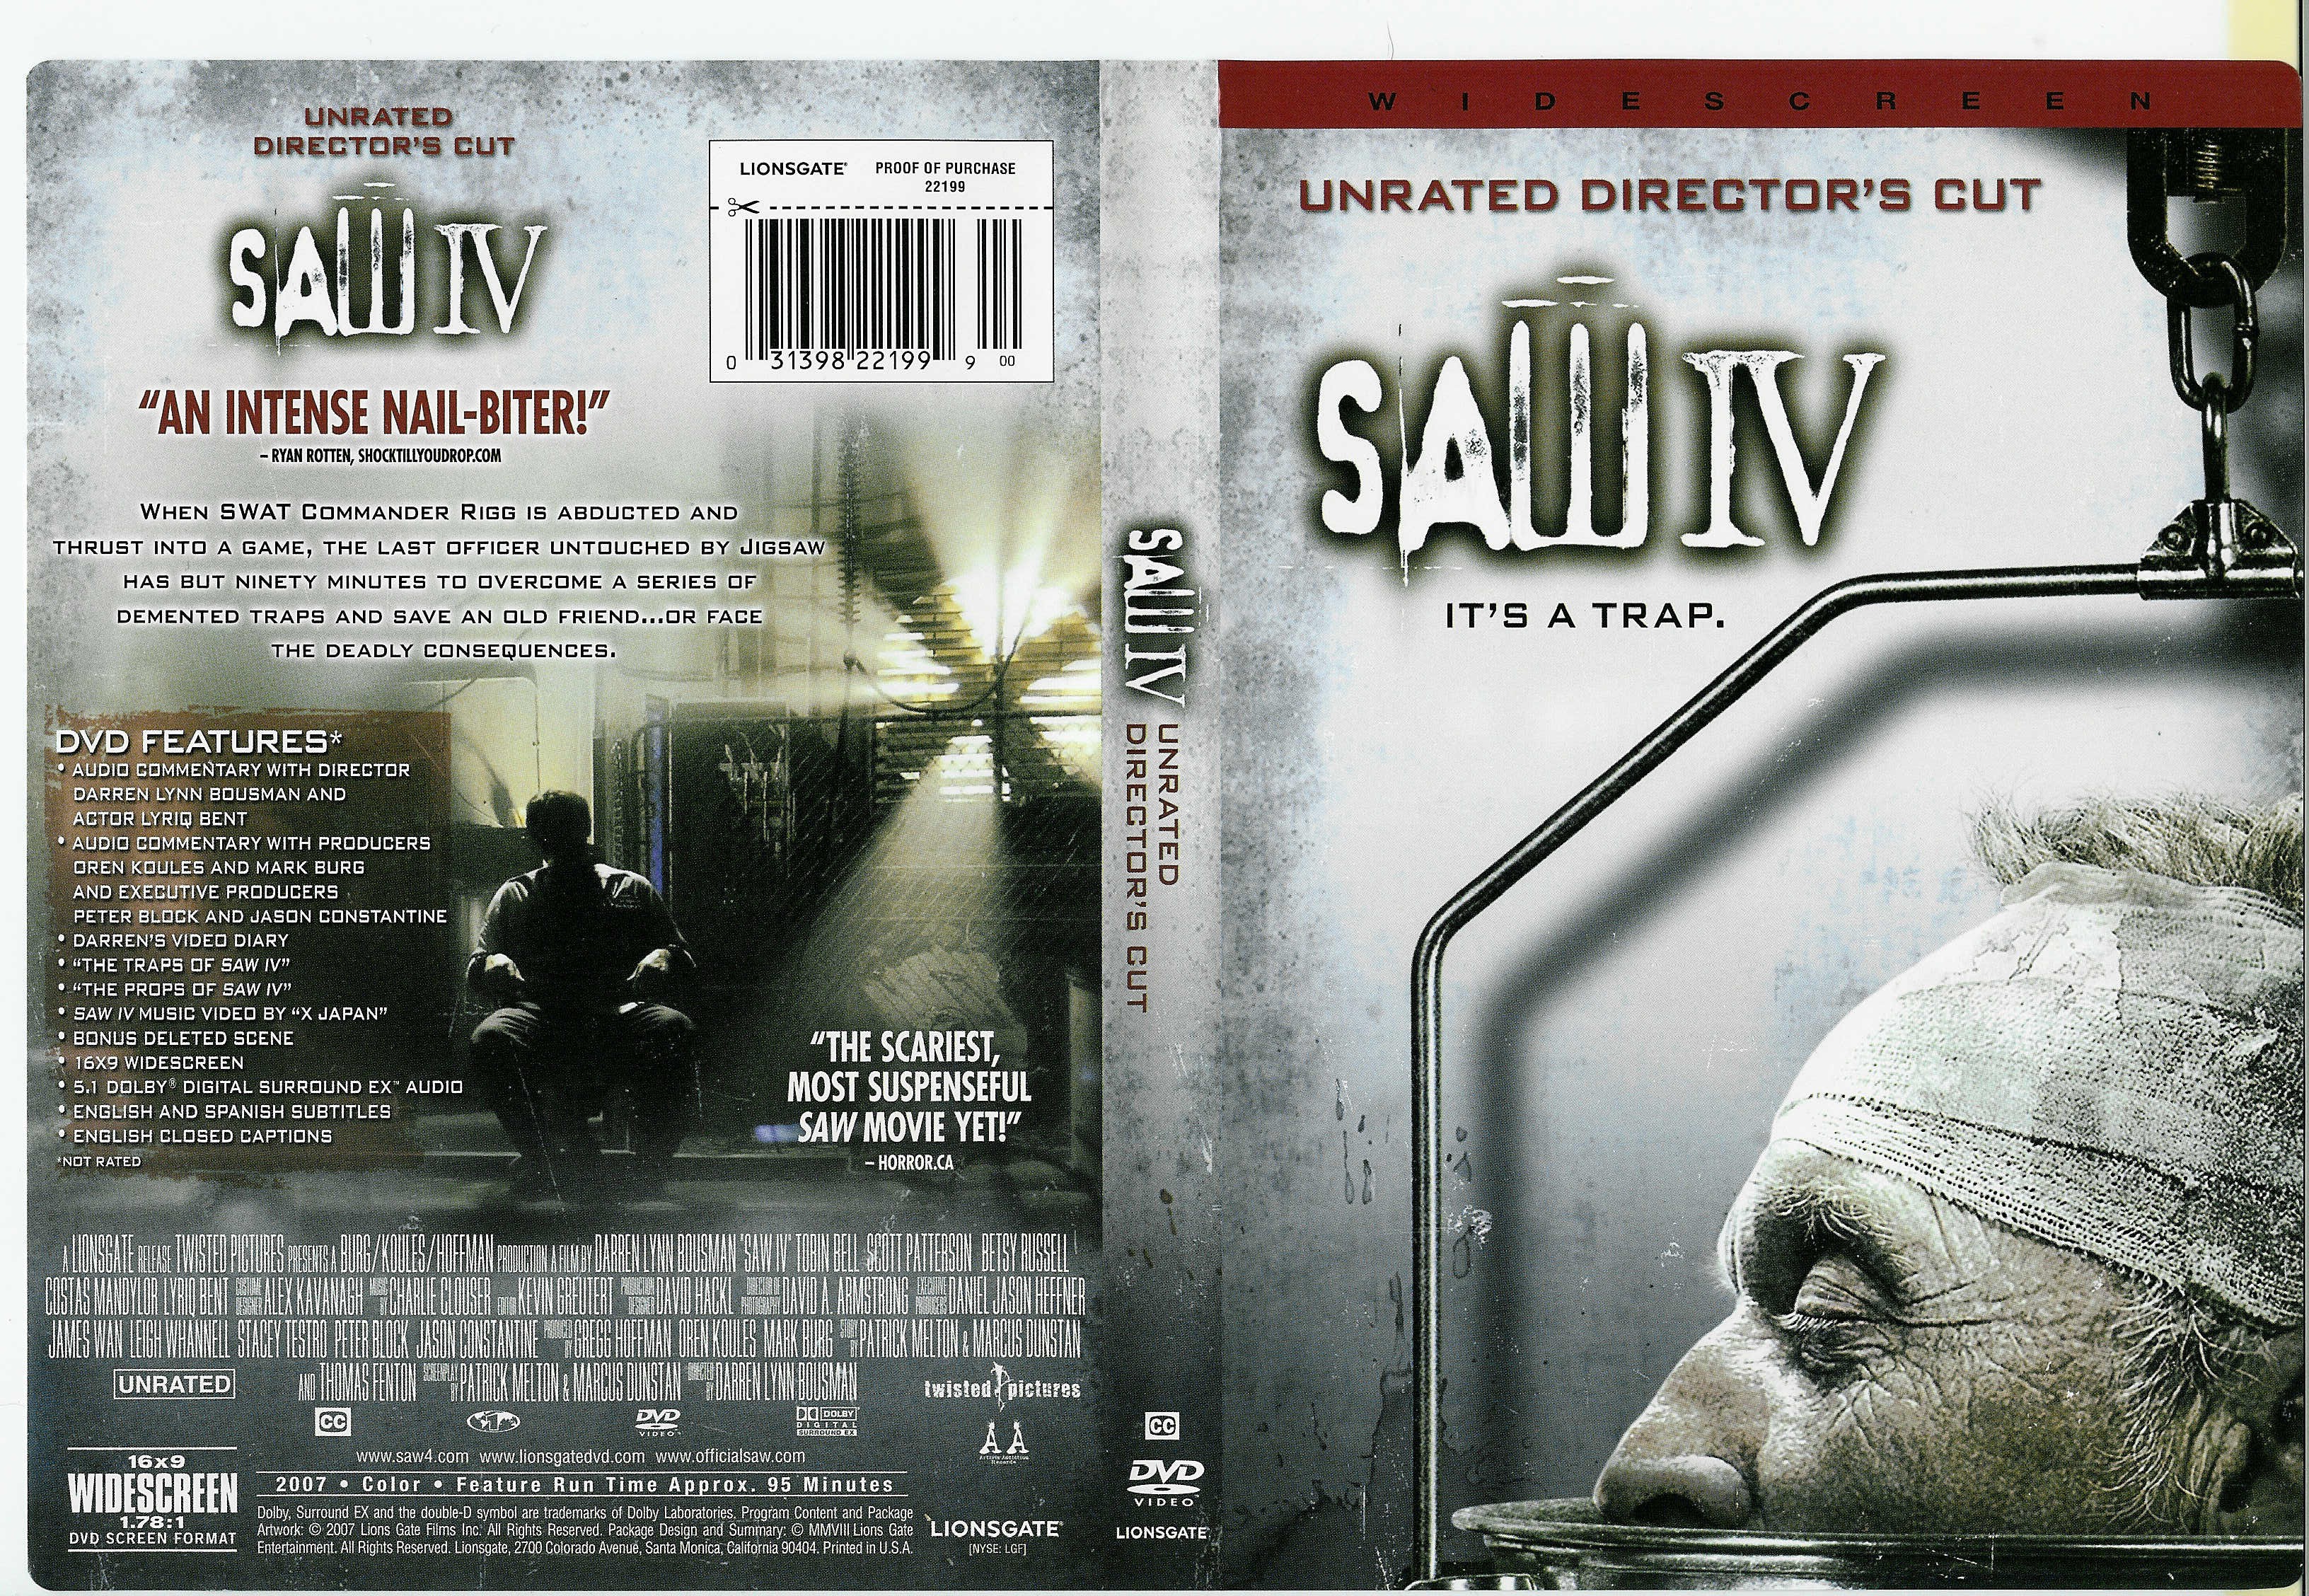 Jaquette DVD Dcadence 4 - Saw 4 (Canadienne)